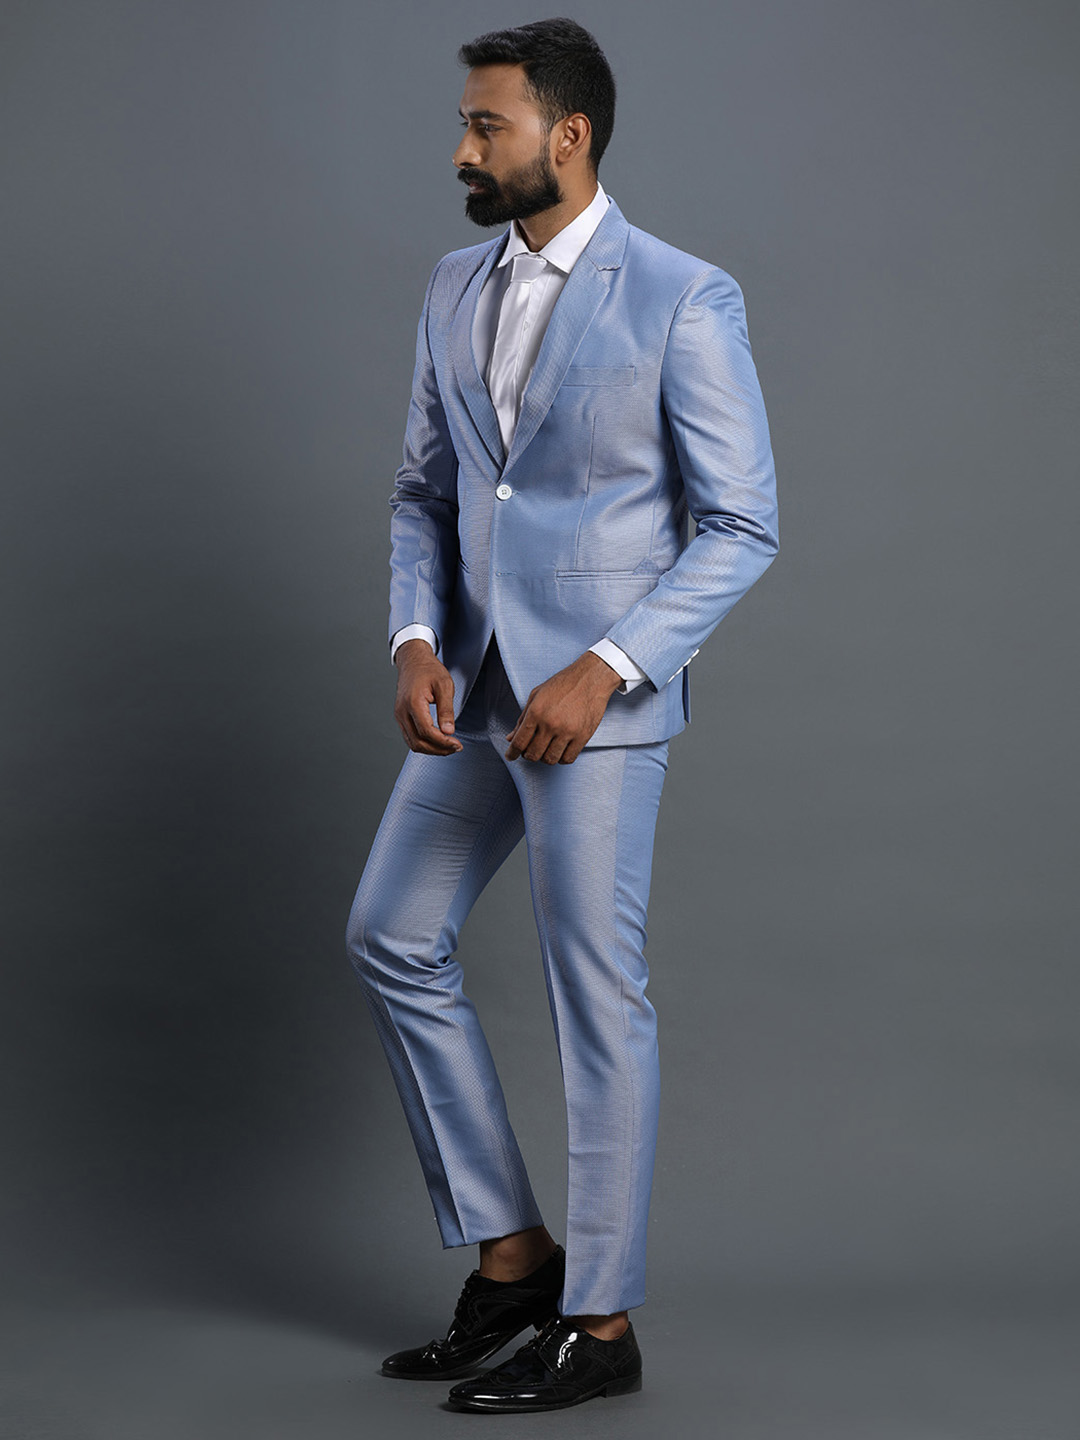 Rent/Buy Shiny Sky Blue Textured Suit | Home Trial | Free Delivery